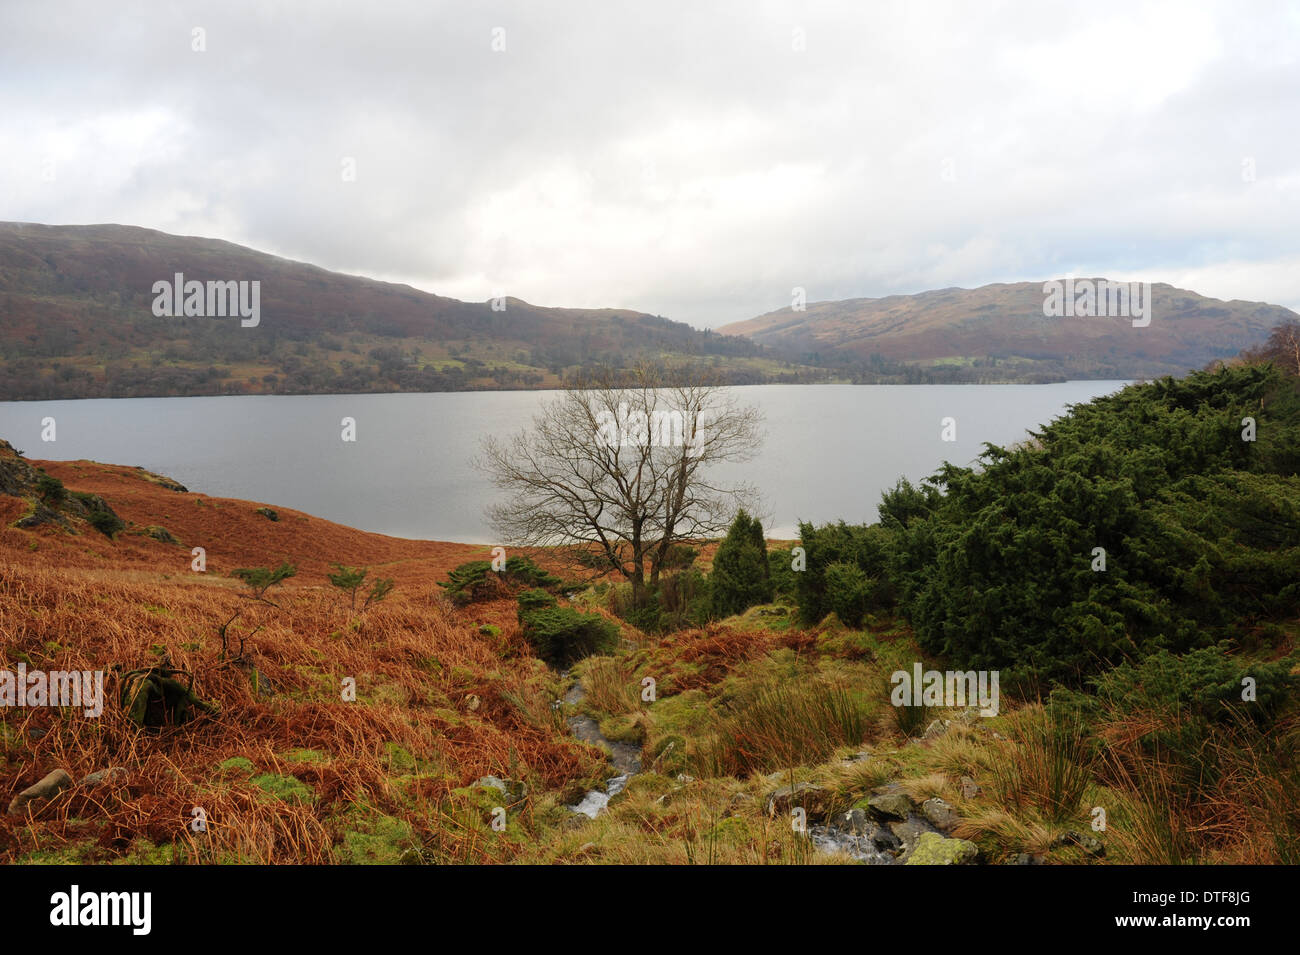 View from the Fells at Silverpoint looking across Ullswater in the Lake District National Park, Cumbria, England, UK Stock Photo